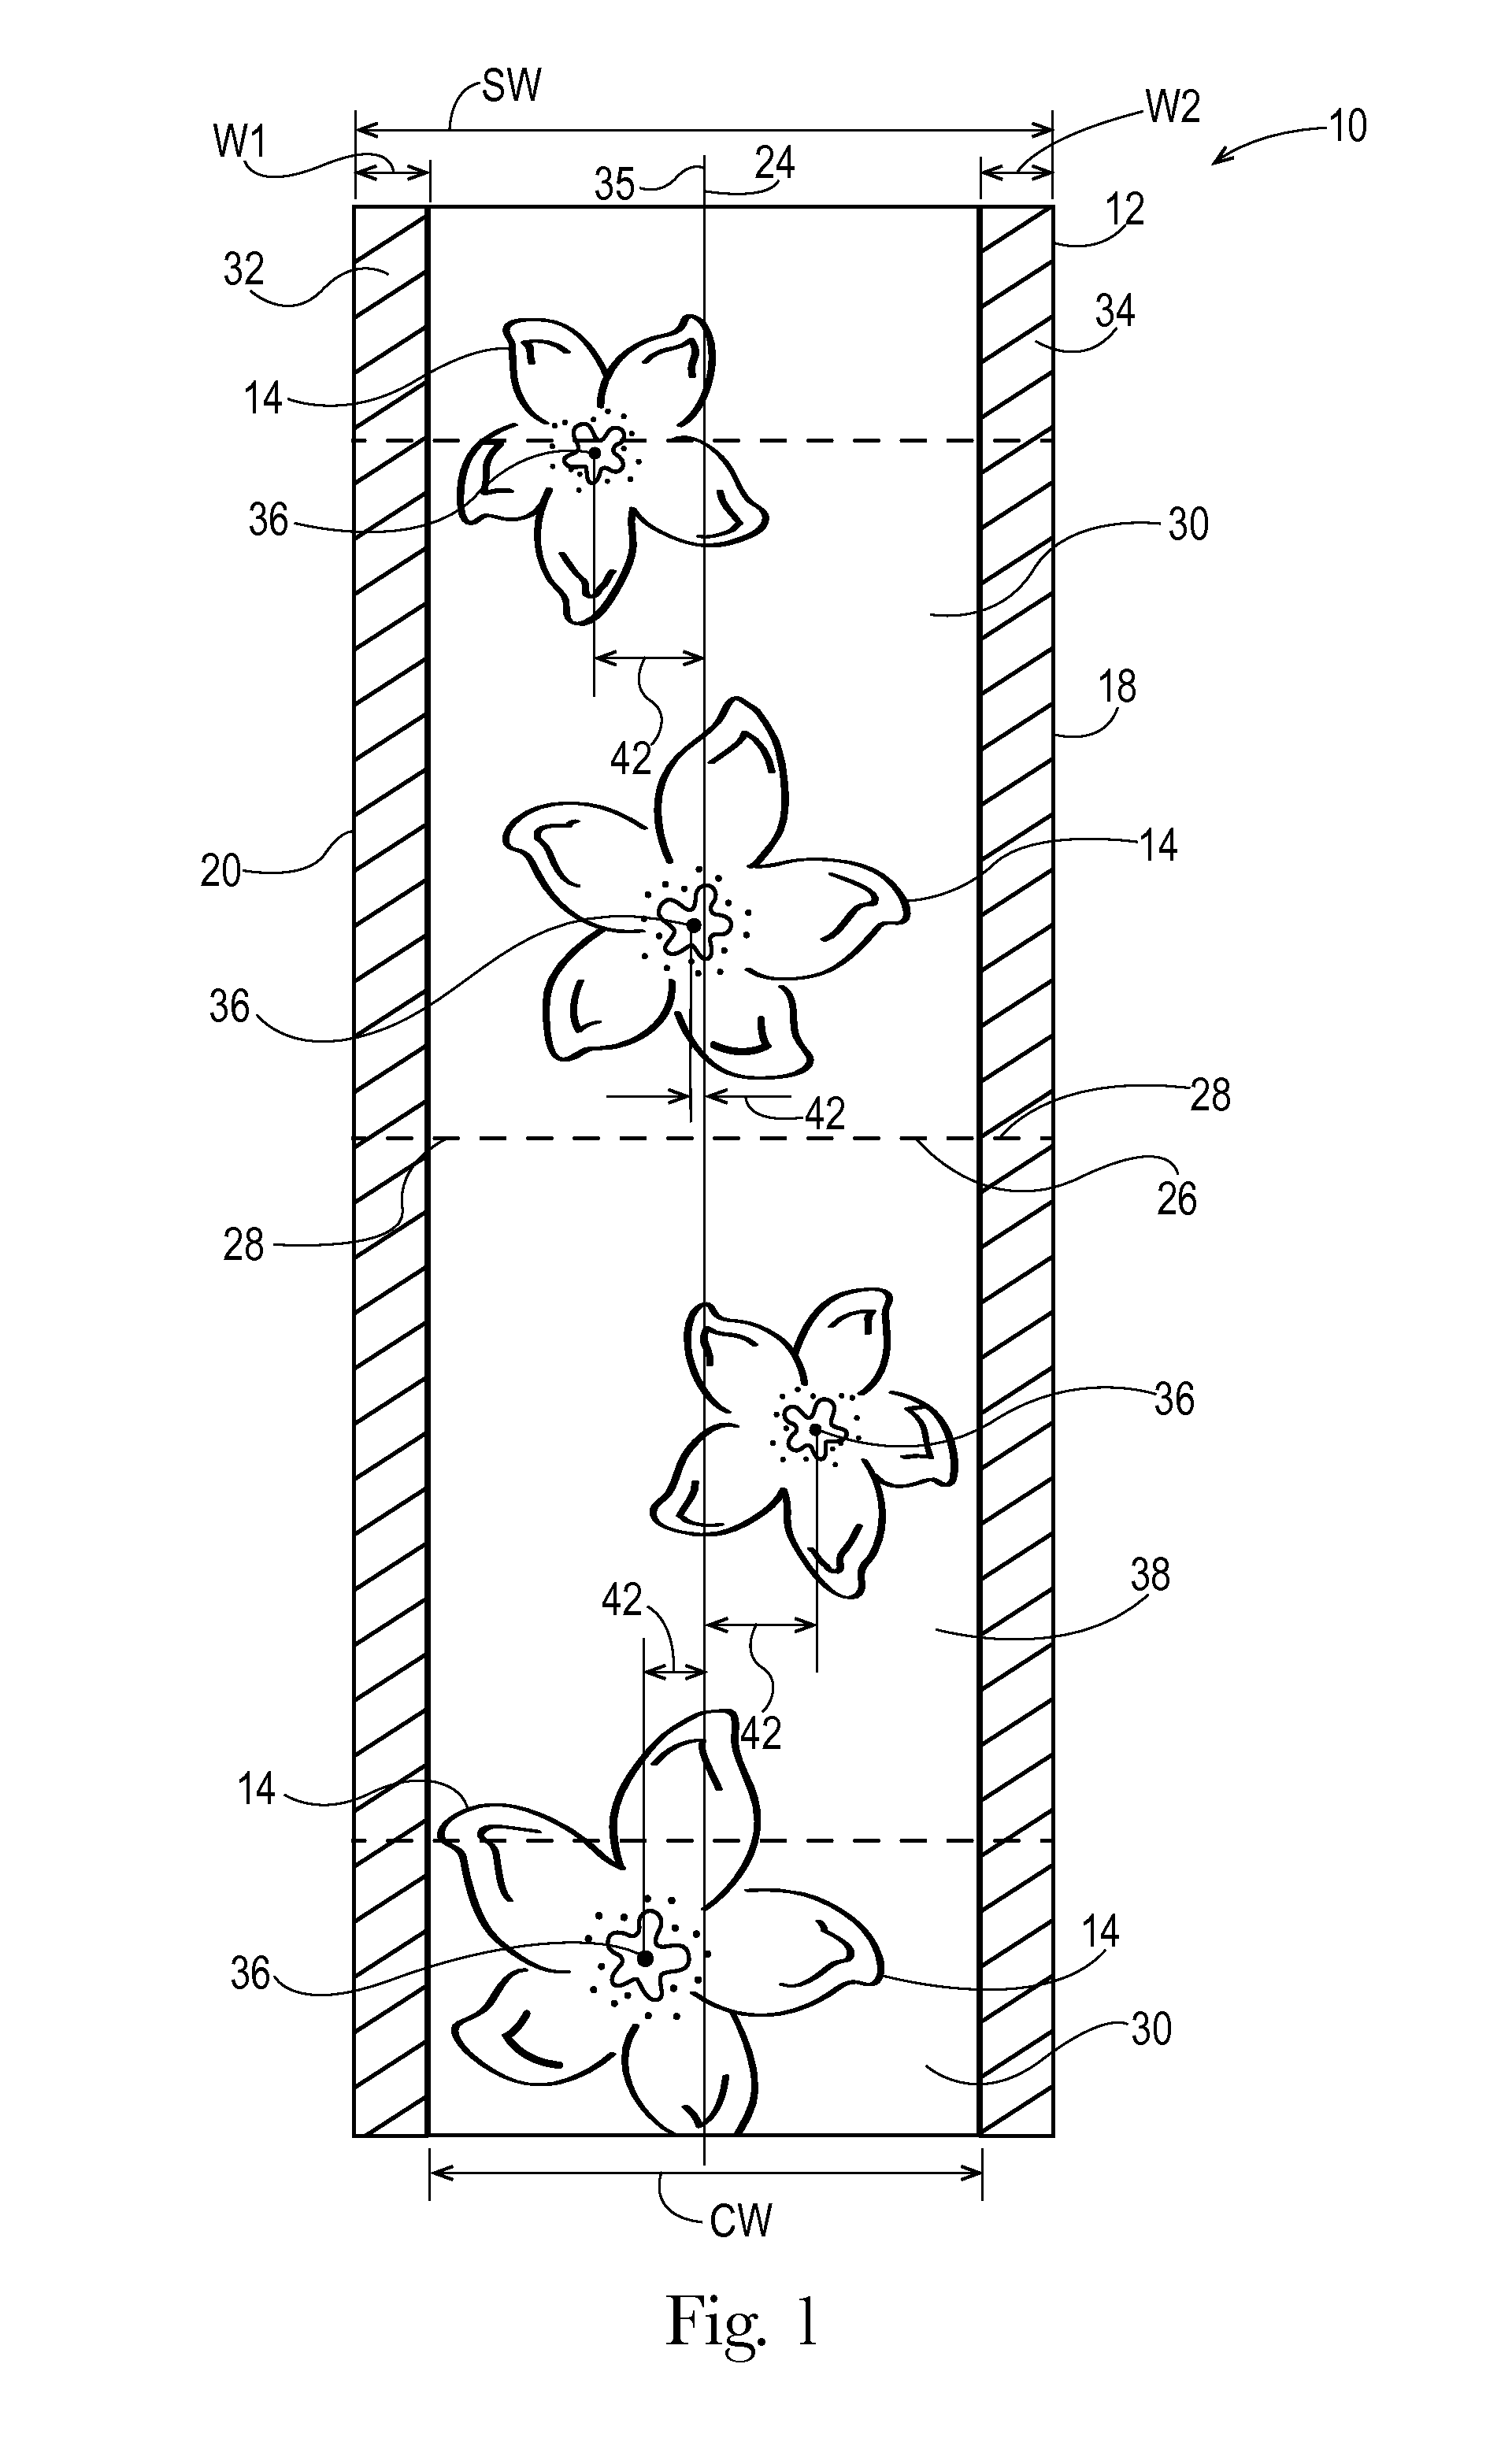 Method for producing an absorbent paper product having visual elements